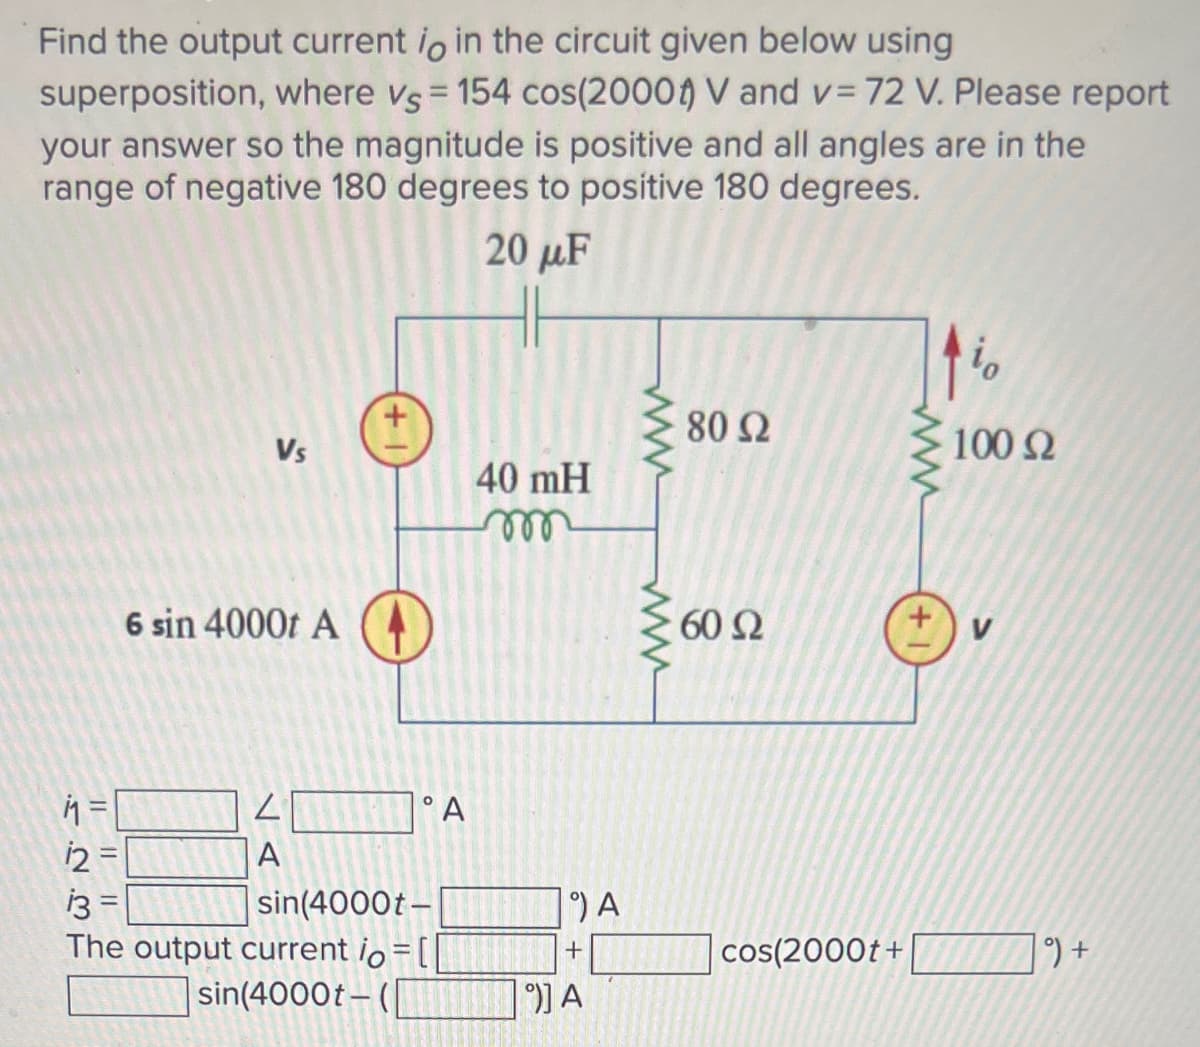 Find the output current io in the circuit given below using
superposition, where vs = 154 cos(2000) V and v= 72 V. Please report
your answer so the magnitude is positive and all angles are in the
range of negative 180 degrees to positive 180 degrees.
20 μF
Vs
1.2.3
6 sin 4000t A
11₁ =
12=
13
The output current io
sin(4000t-(|
L
A
°A
sin(4000t-
40 mH
°) A
+
°)] A
www
8092
60 Ω
cos(2000t+
www
+1
io
100 Q2
9) +